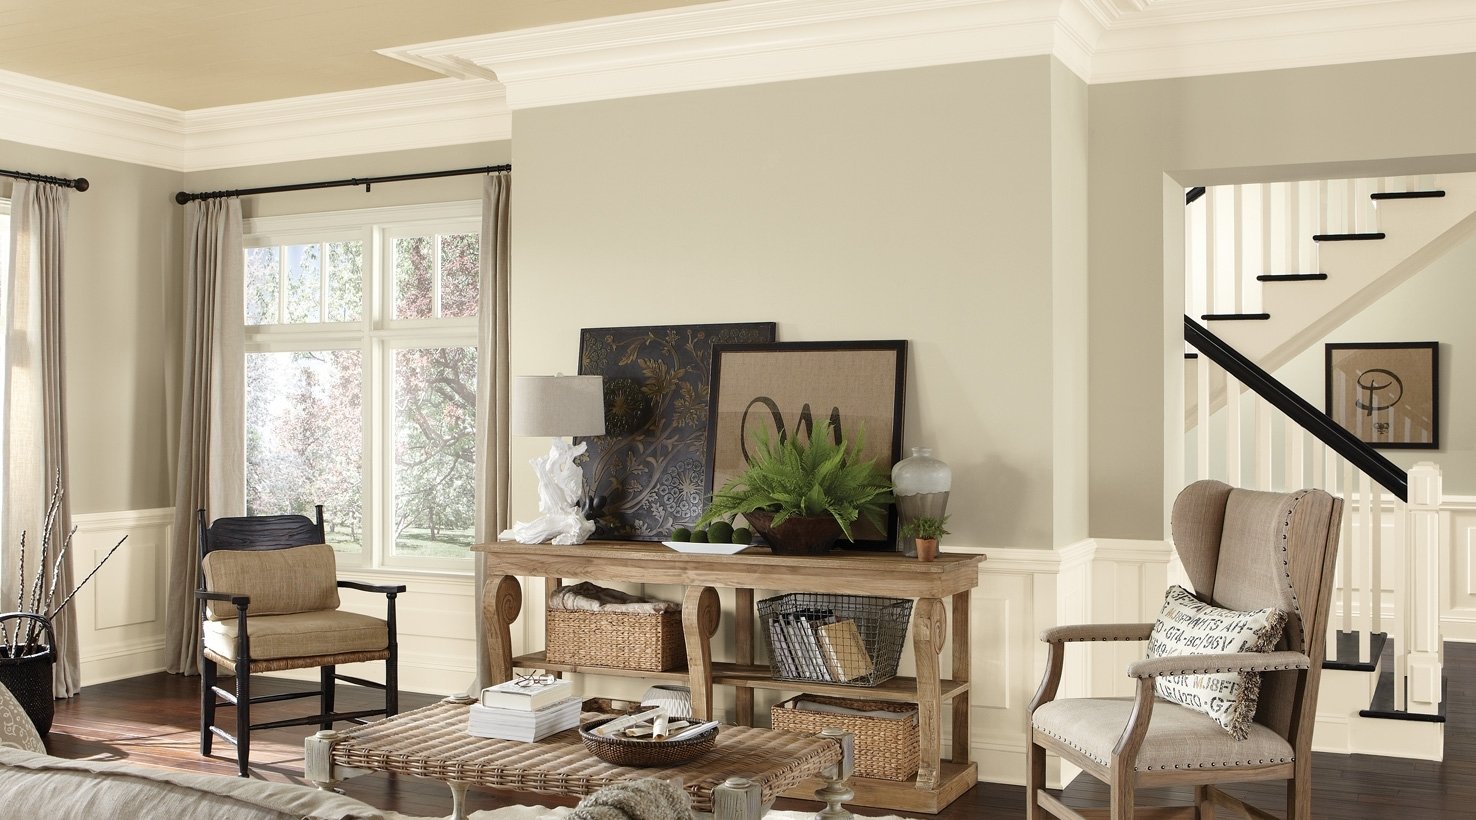 10 Wonderful Paint Ideas For Living Room living room paint color ideas inspiration gallery sherwin williams 5 2022